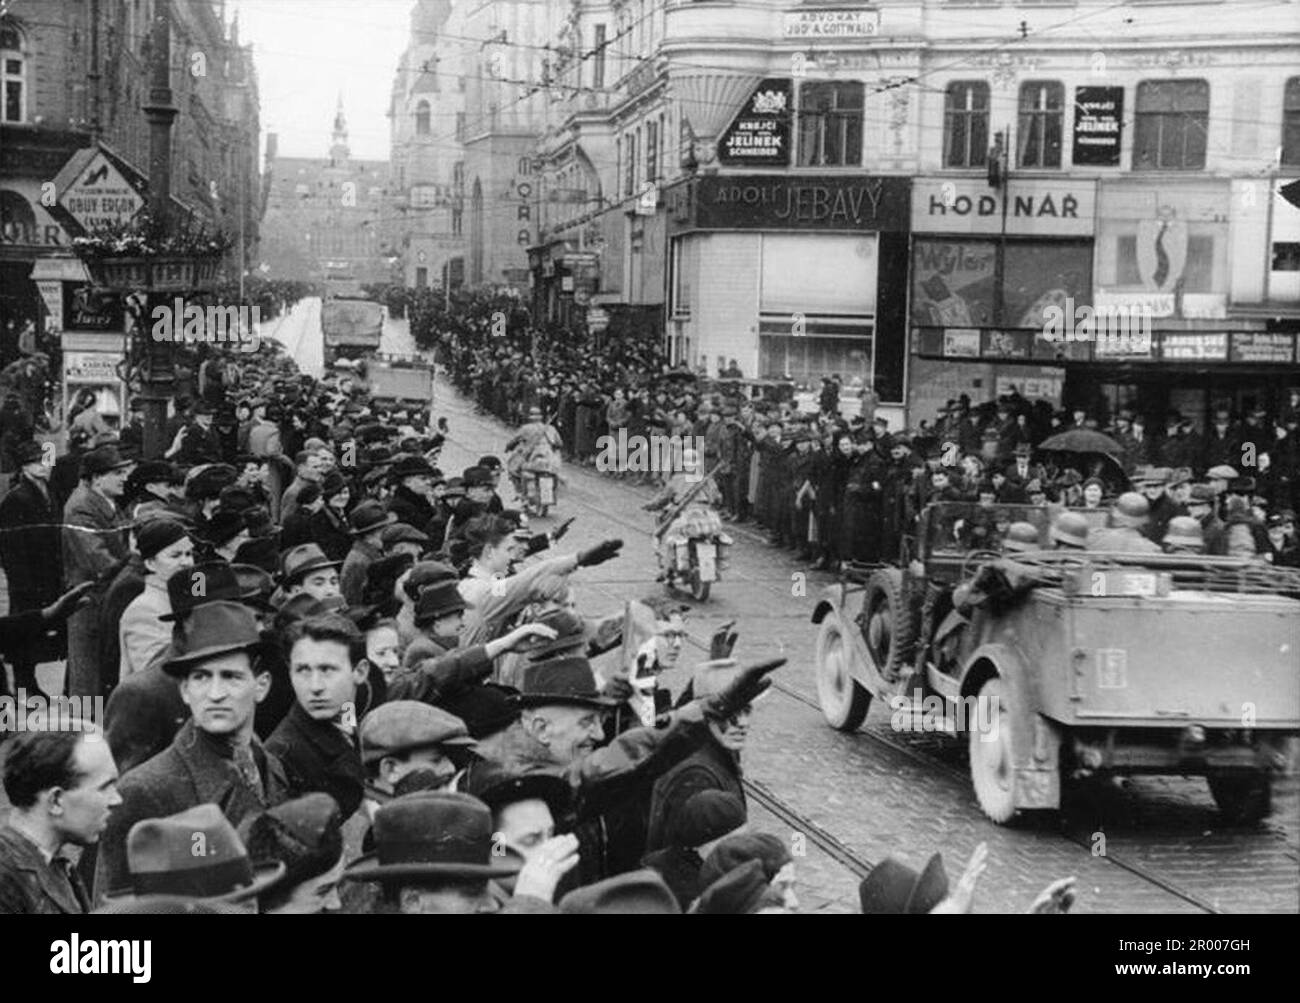 Crowds fill the streets of Brünn in Czecholslovakia after the annexation of the Sudetenland. After the annexation of Austria, Hitler demanded that he be given the Sudeten region of Czechoslovakia. At the Munich conference in September 1938 the Western powers agreed to this and the nazis occupied the area. Not long after Hitler broke his promise and invaded the rest of Czechoslovakia before turning his attention to Poland. Bundesarchiv, Bild 183-2004-0813-500 / Unknown / CC-BY-SA 3.0 Stock Photo